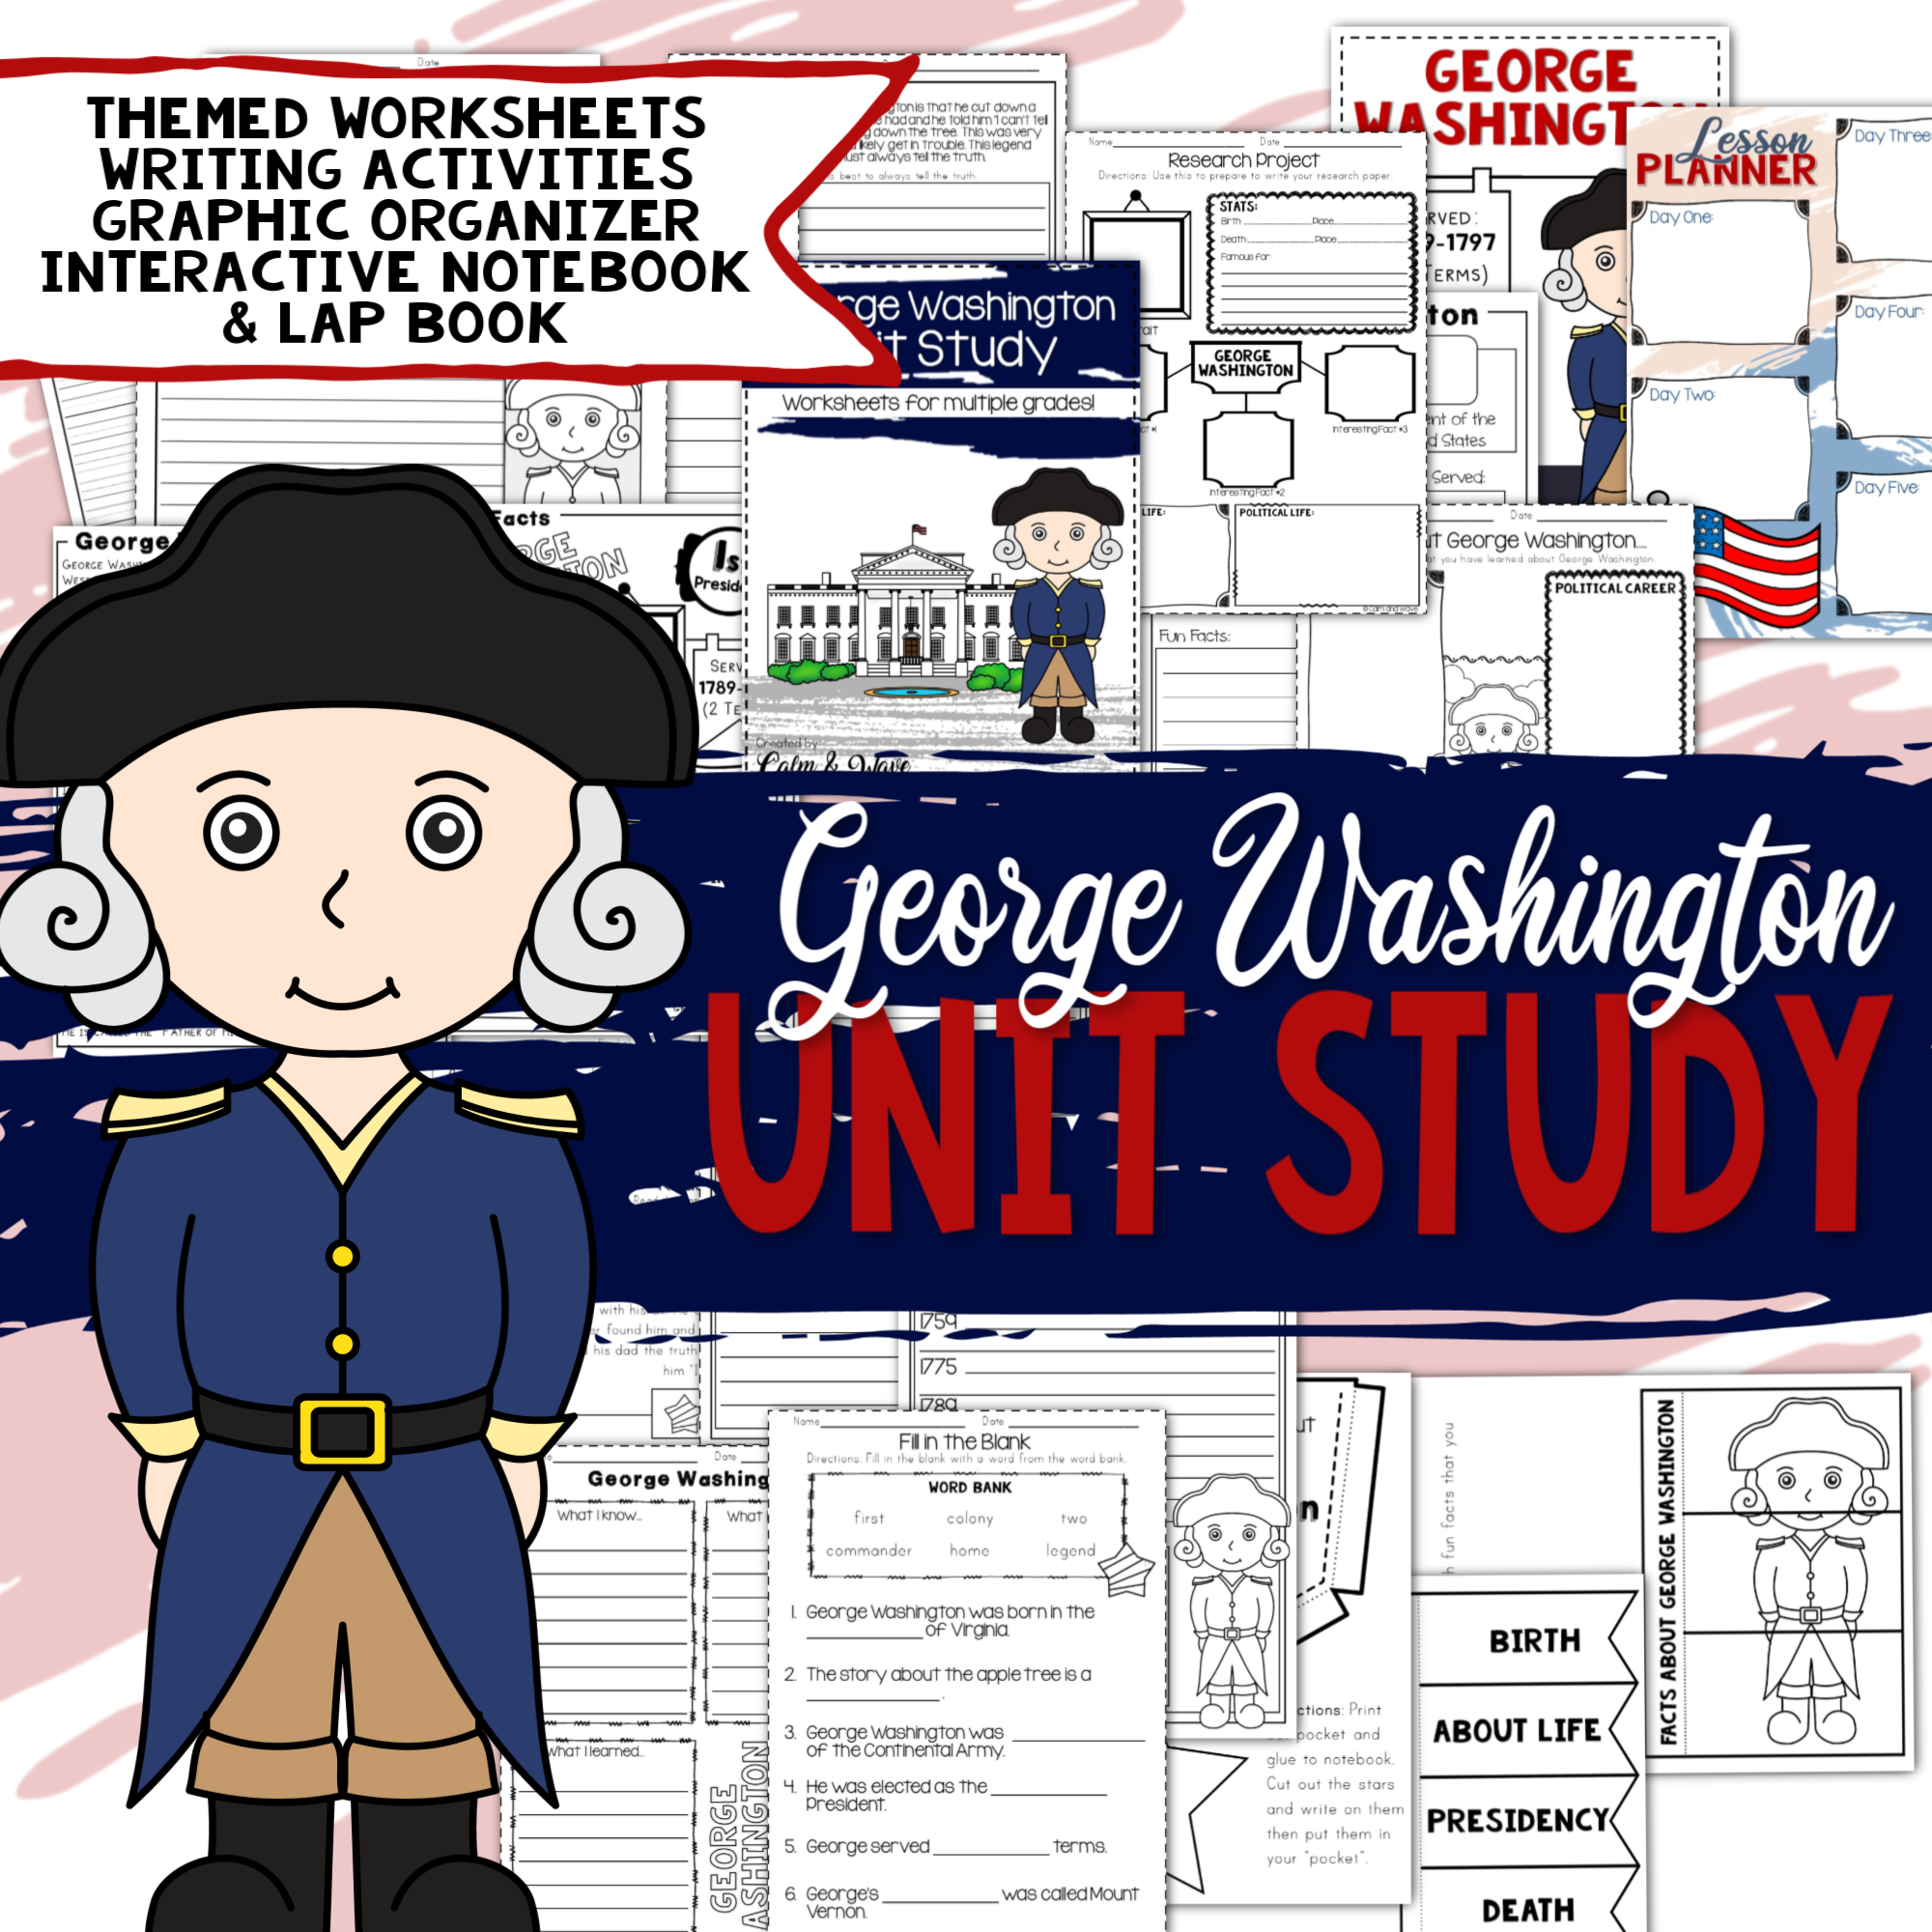 George Washington Thematic Unit Study Worksheets with Lapbook or Interactive Notebook